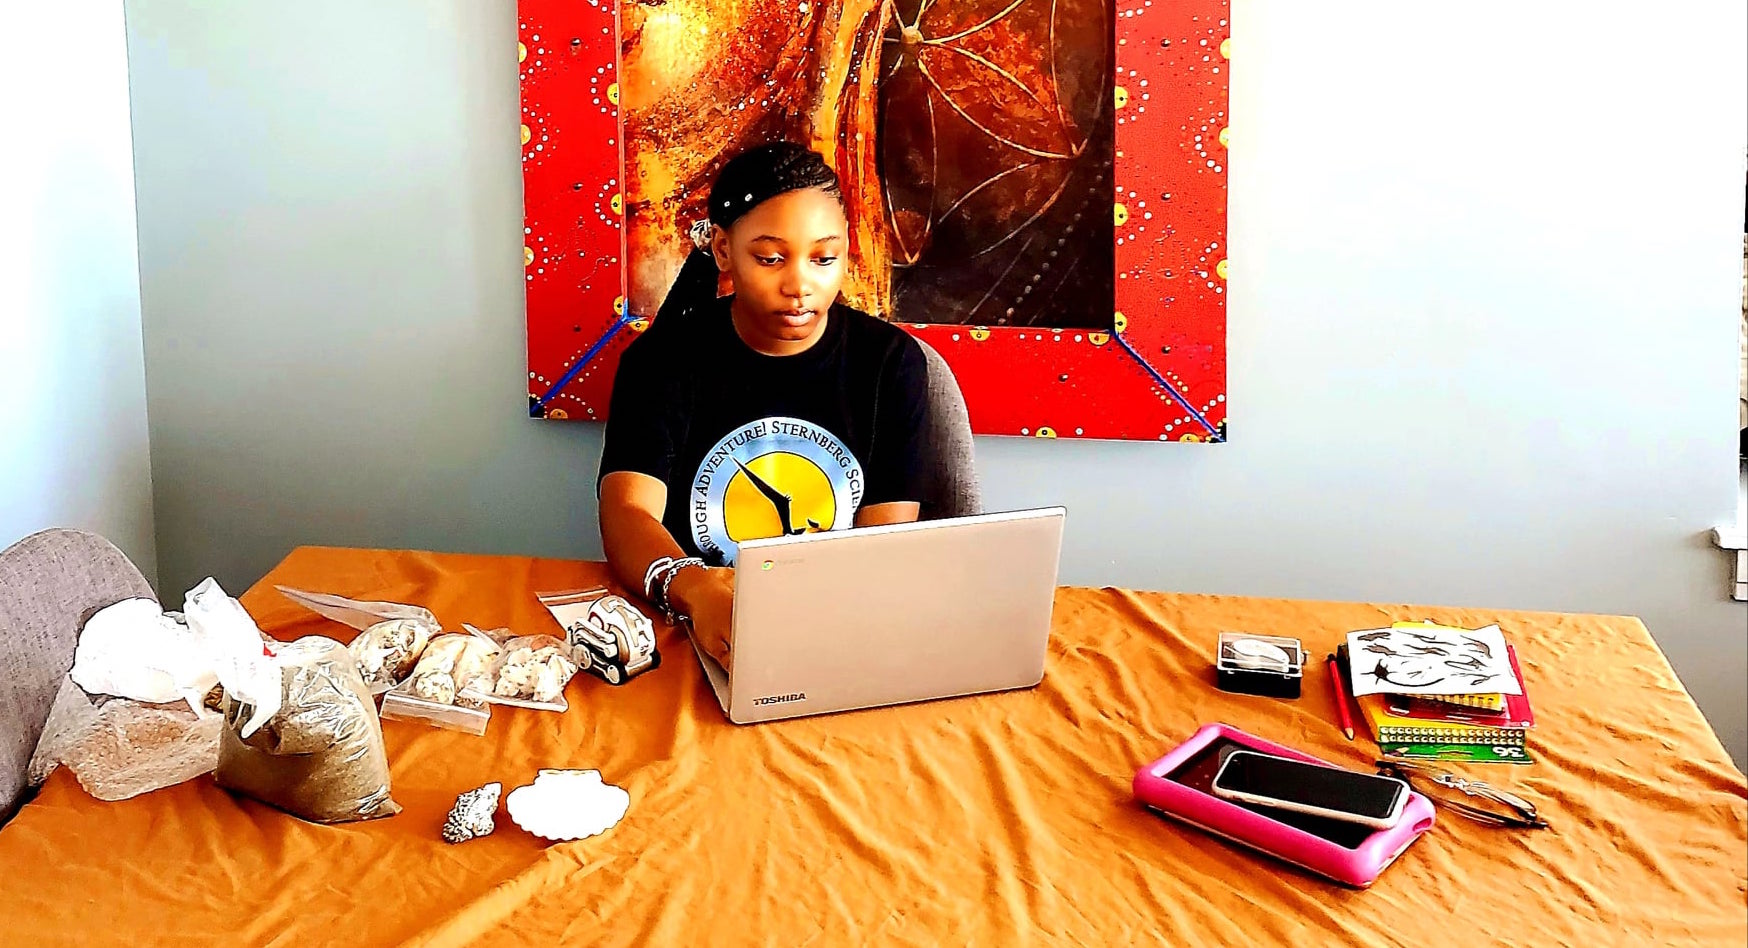 Surrey Jones, a middle school camper from Chicago, works at her family’s dining room table, surrounded by materials she received in her camp kit box for the Ancient Seas camp.